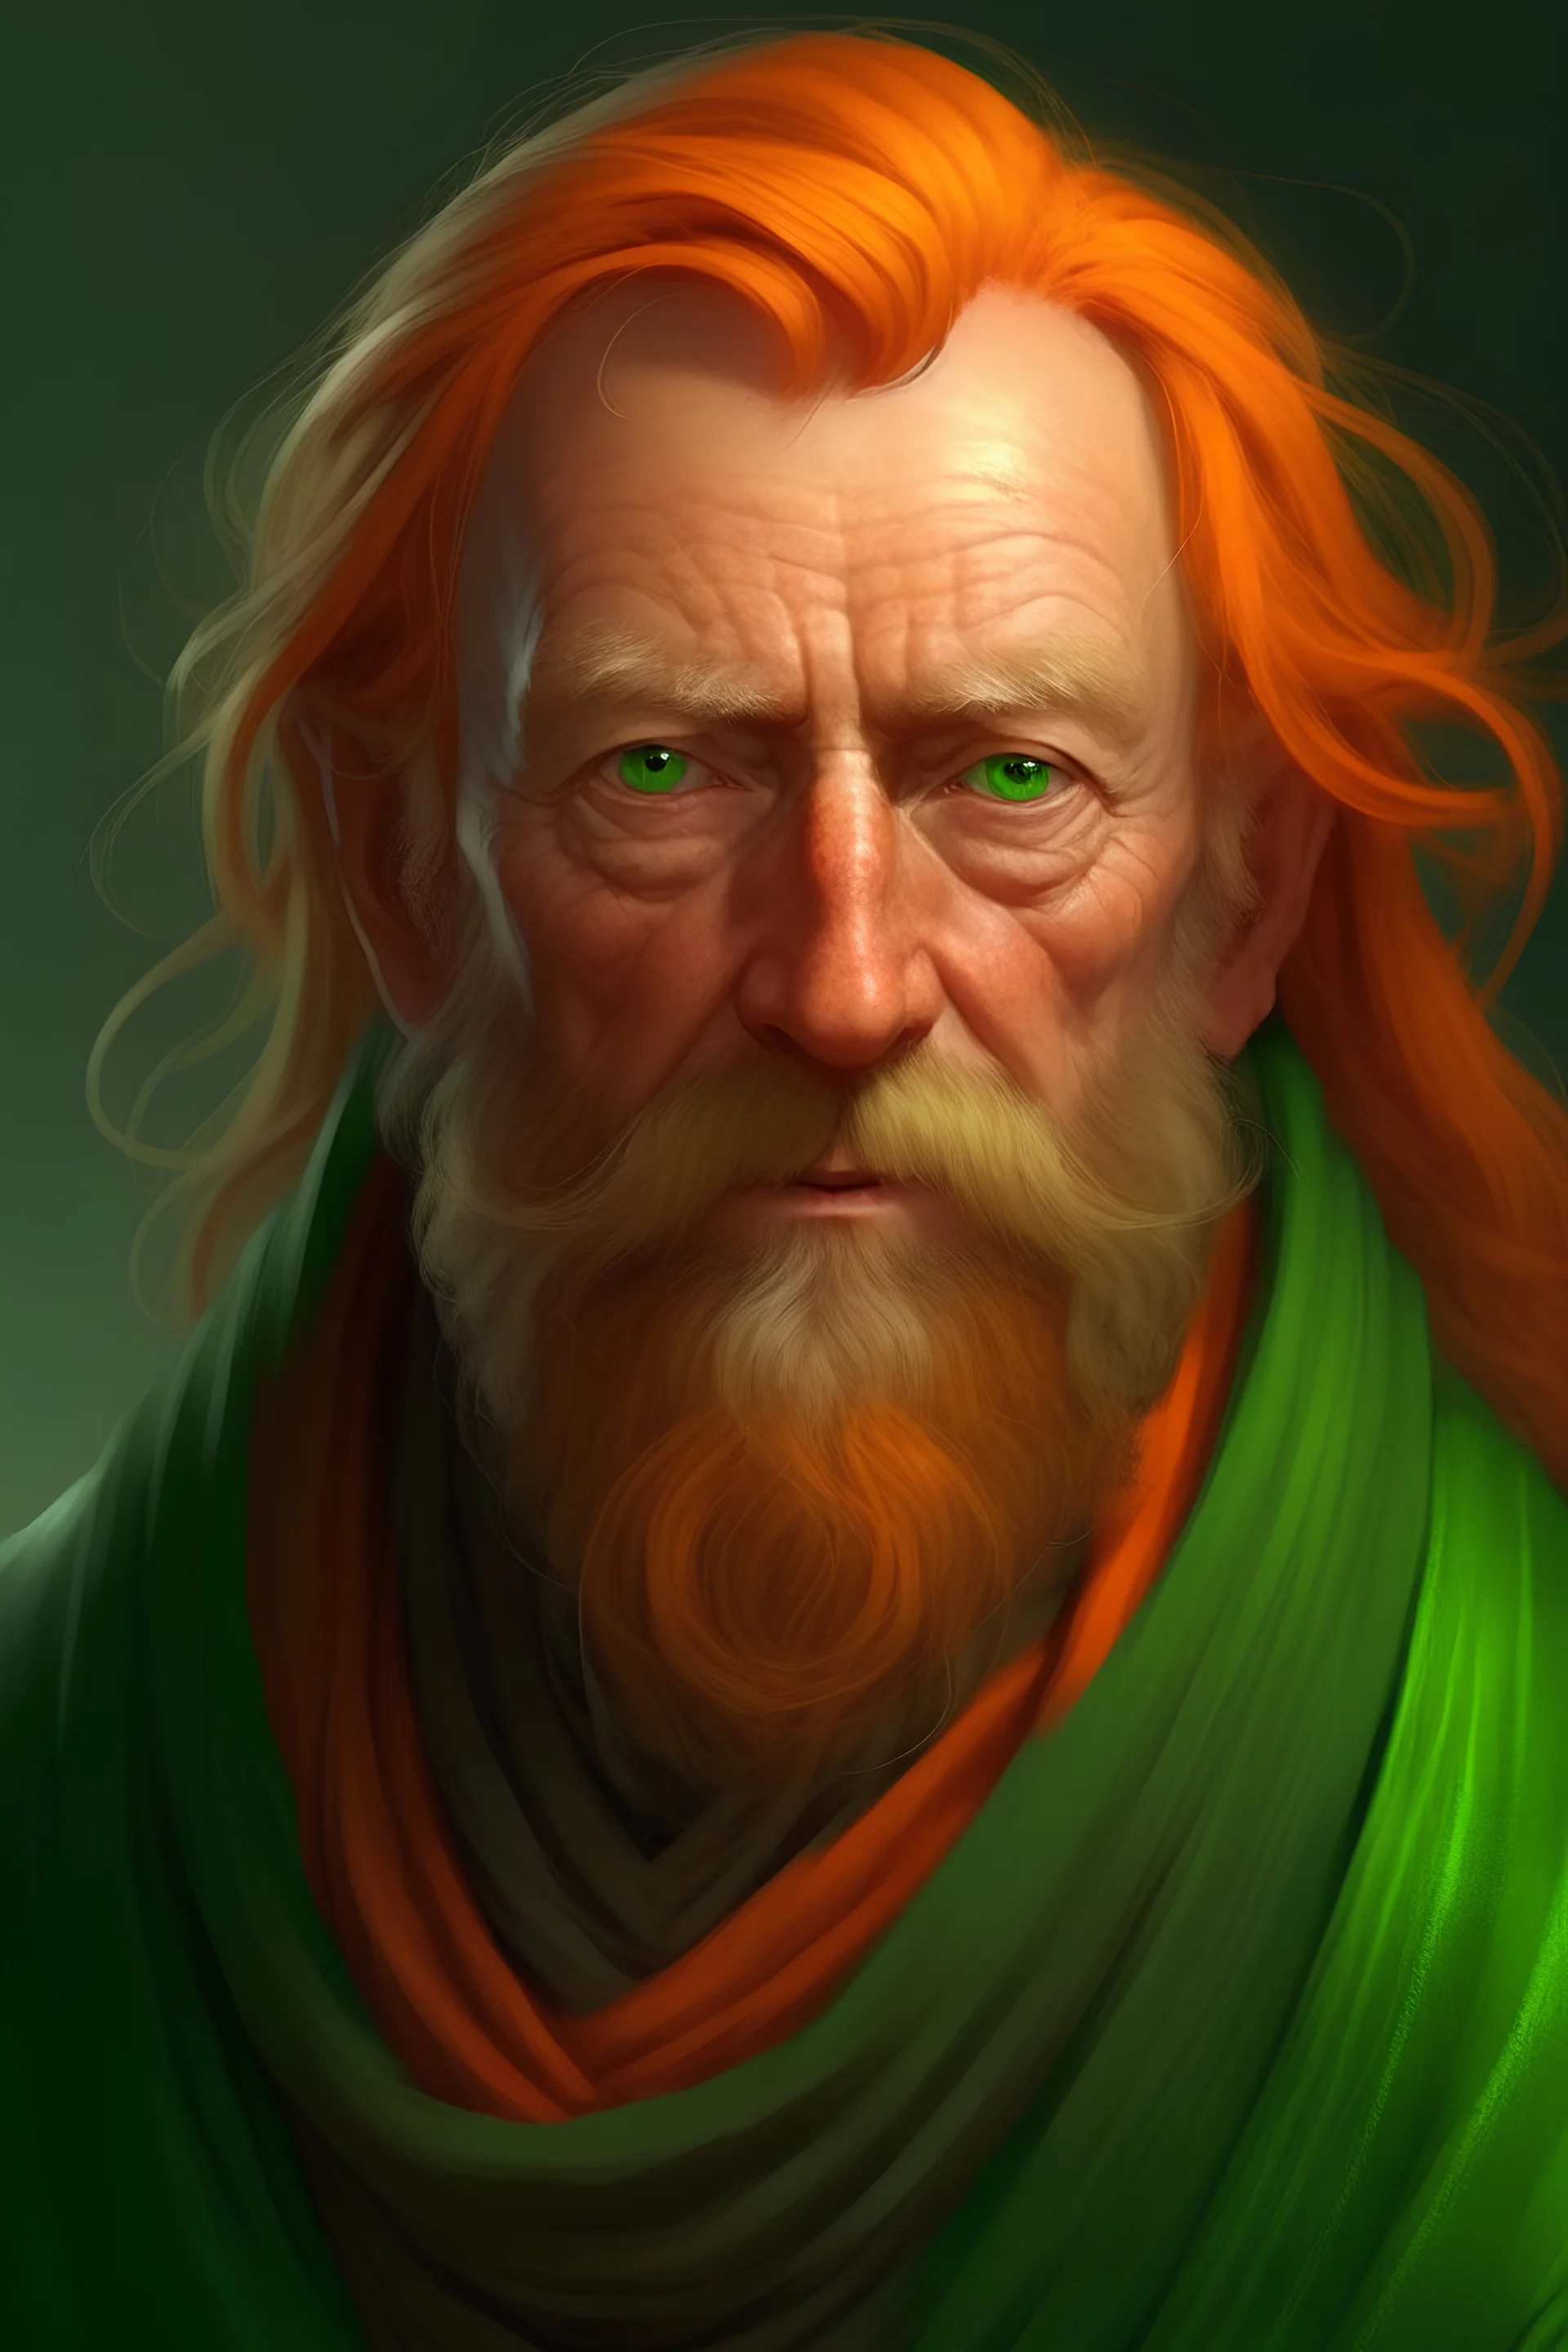 a man in his fifties, medium length orange hair with bits of grey, medium length beard with bits of grey, long nose, narrow lips, grey eyes, dressed in a bright green robe, realistic epic fantasy style